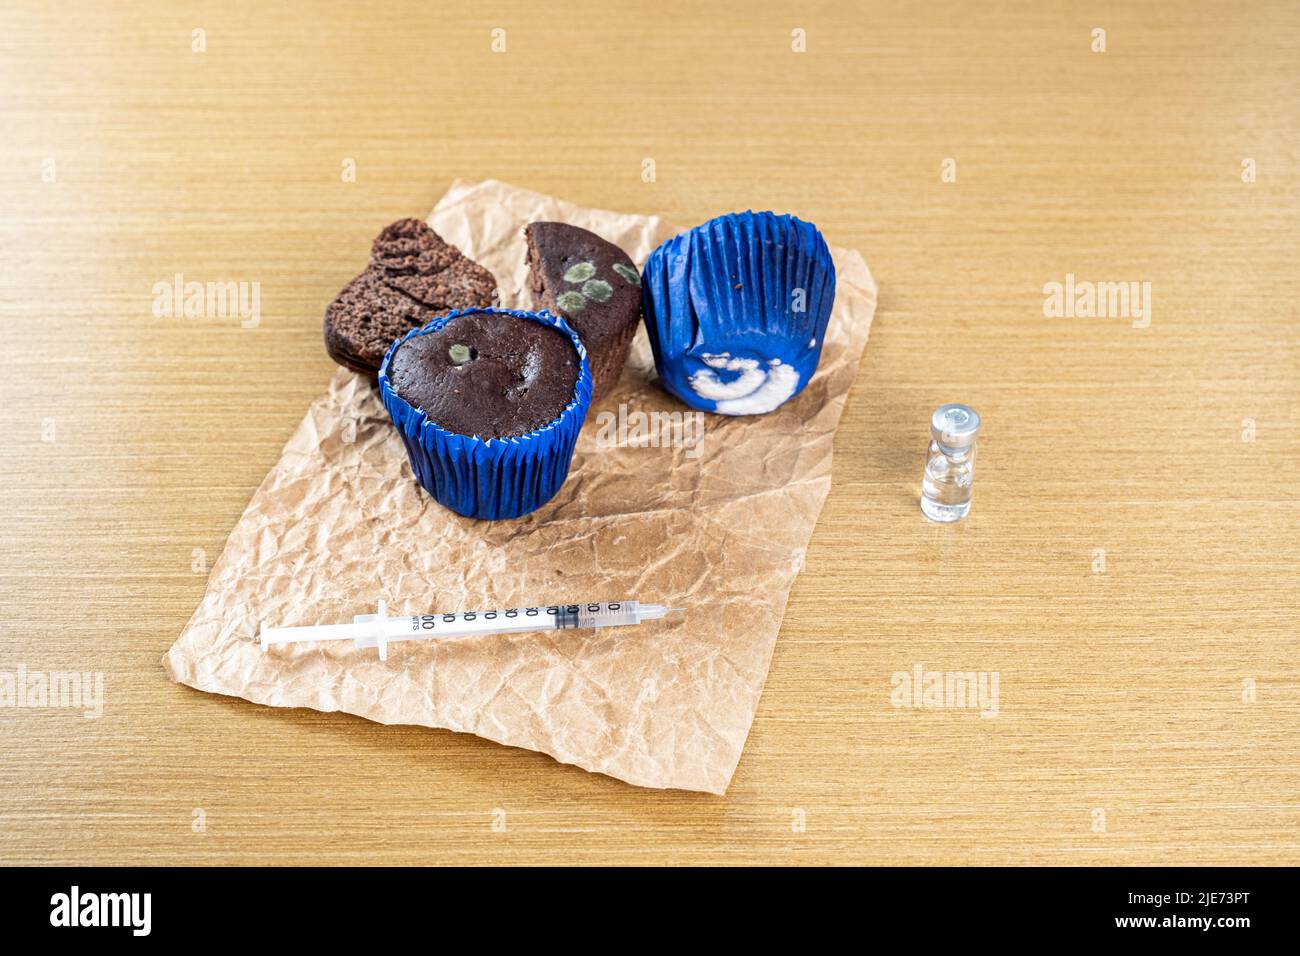 Syringe with insulin next to old, moldy muffins. Stock Photo